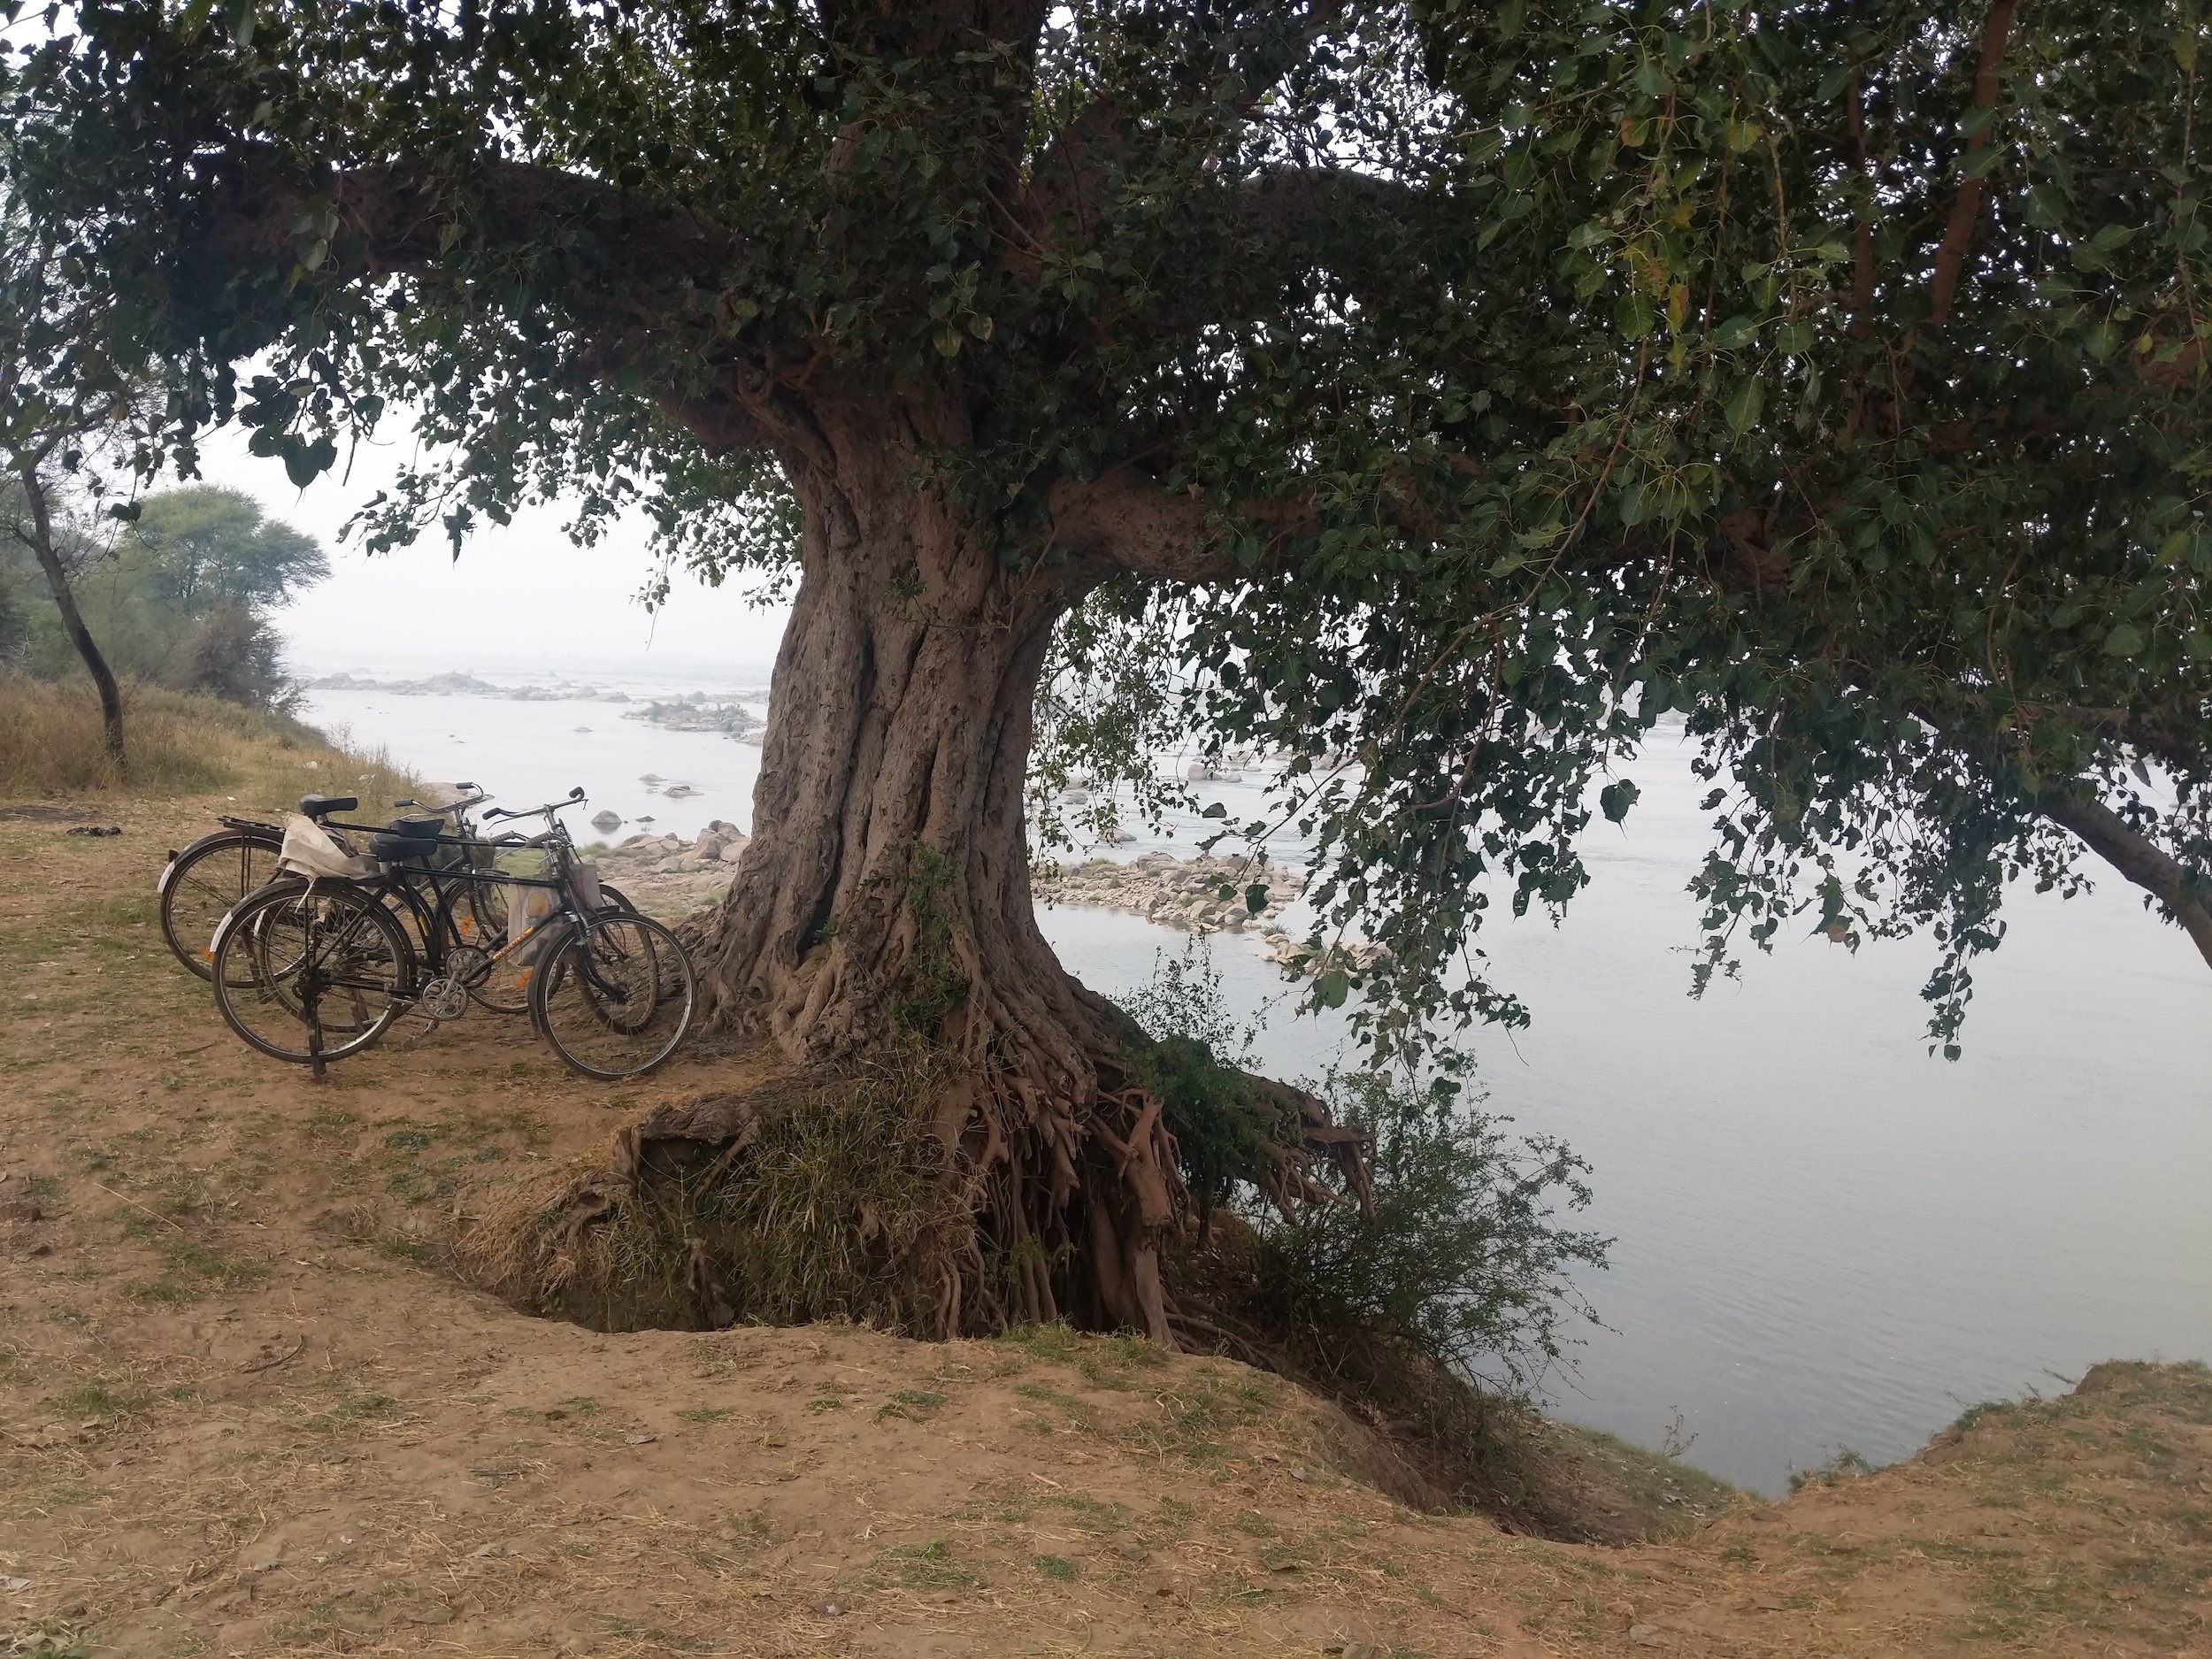 <p>Erosion by the Betwa river endangers a tree [image by Mohit M. Rao and Astha Choudhary]</p>